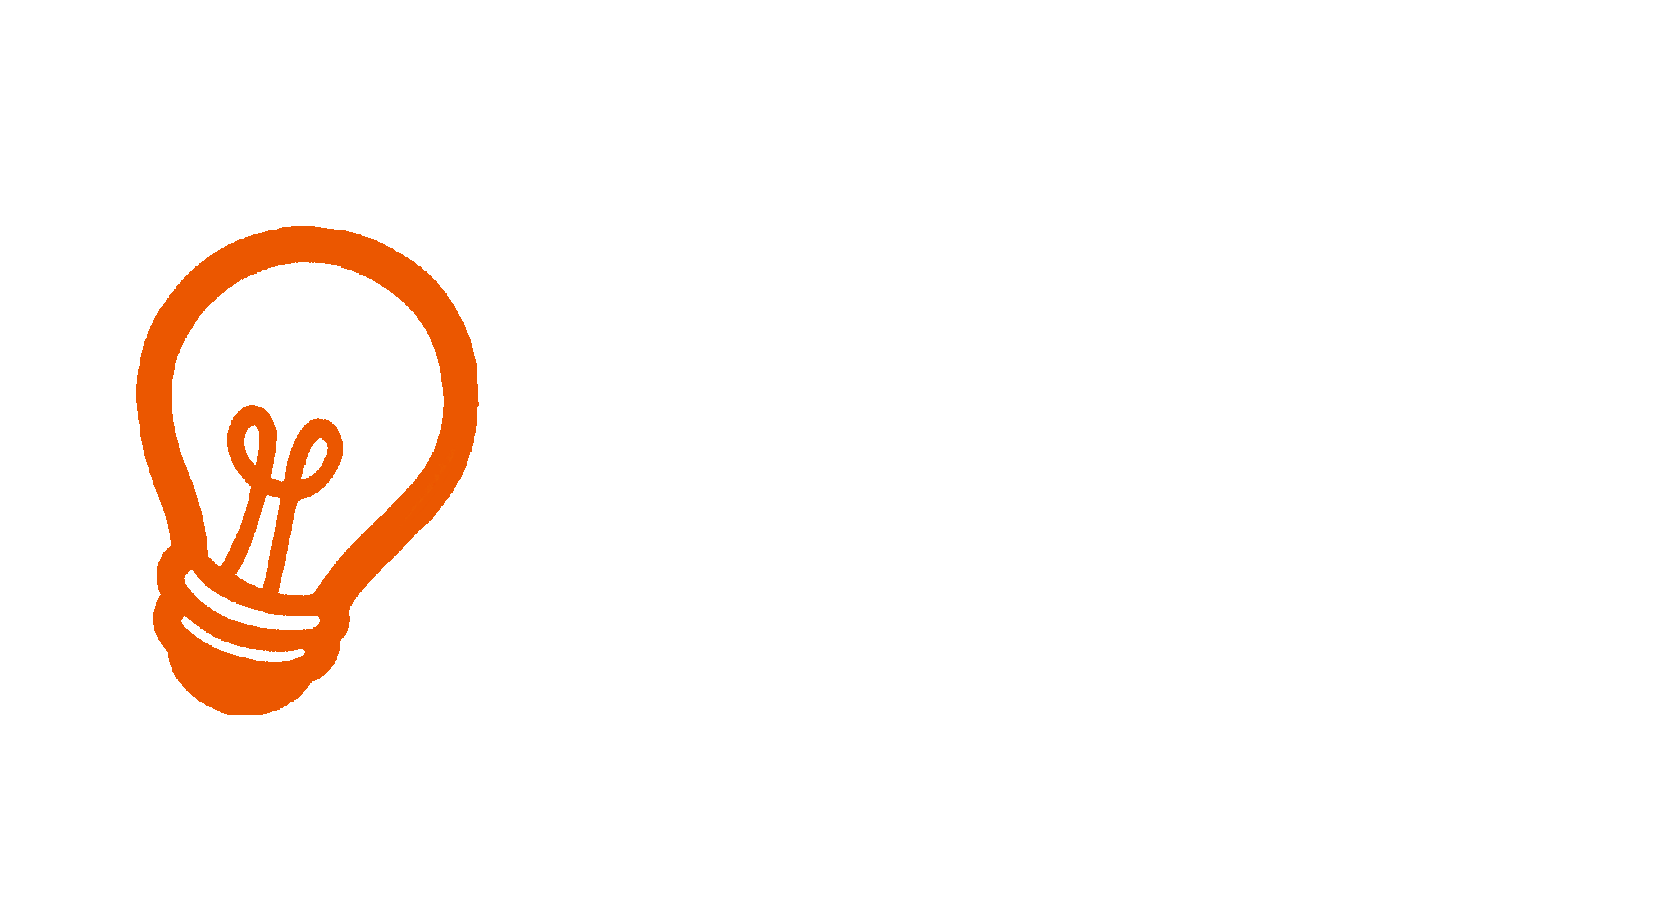  Meaningful Games 